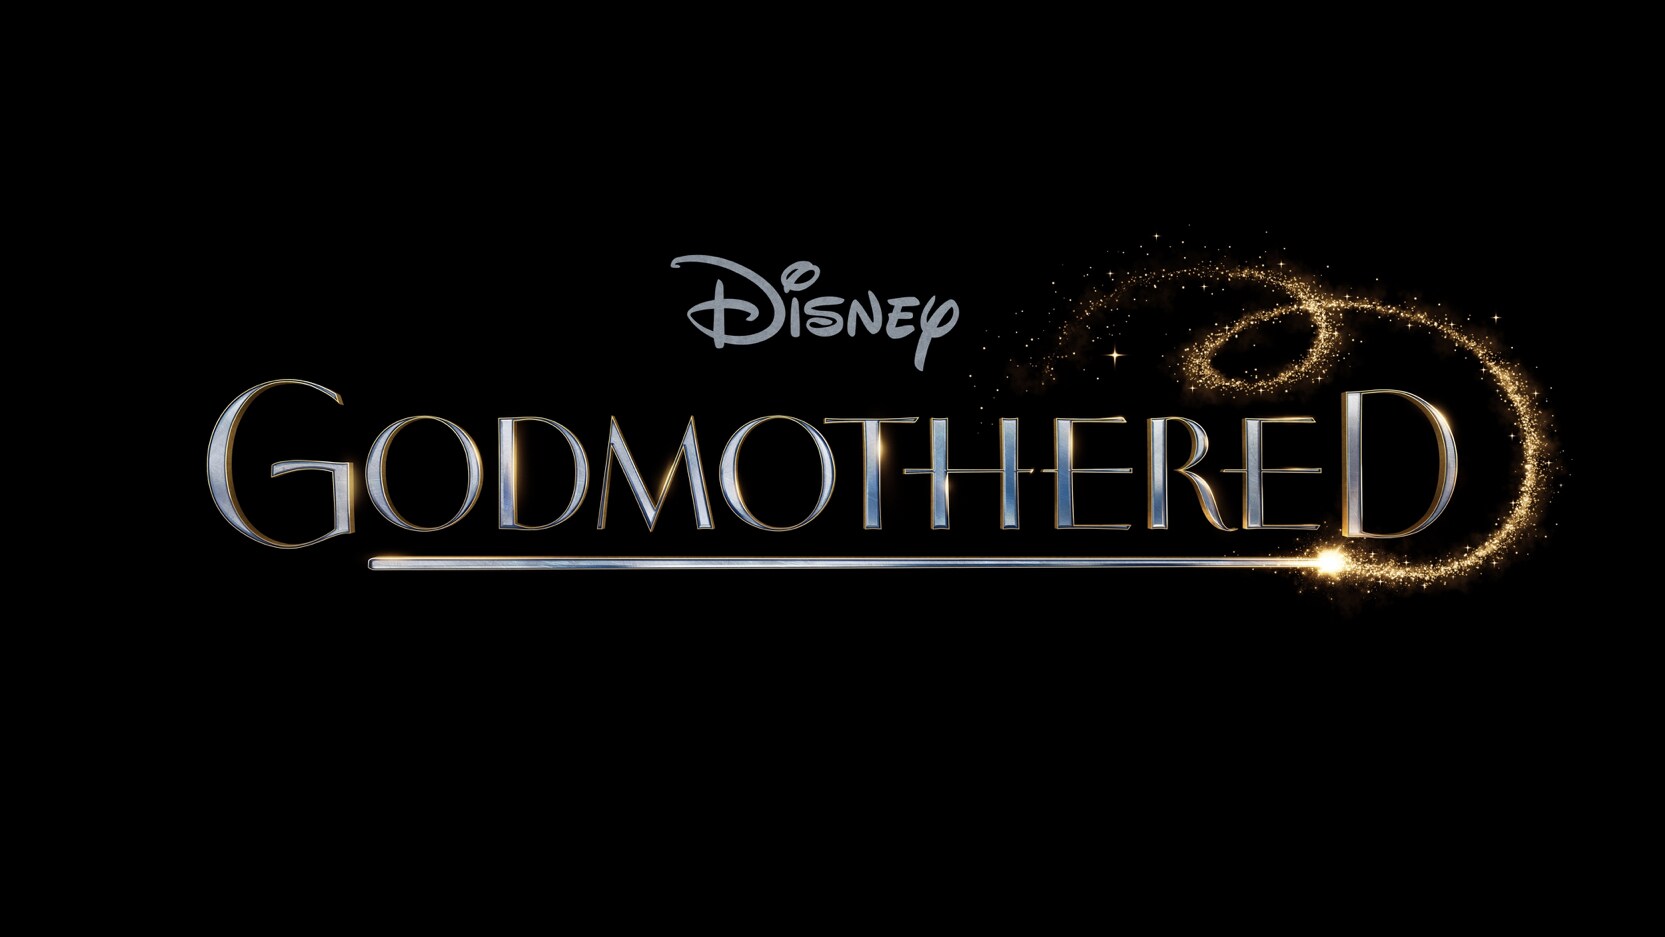 Disney’s magical holiday comedy “Godmothered” to debut on Disney+ on December 4, 2020 